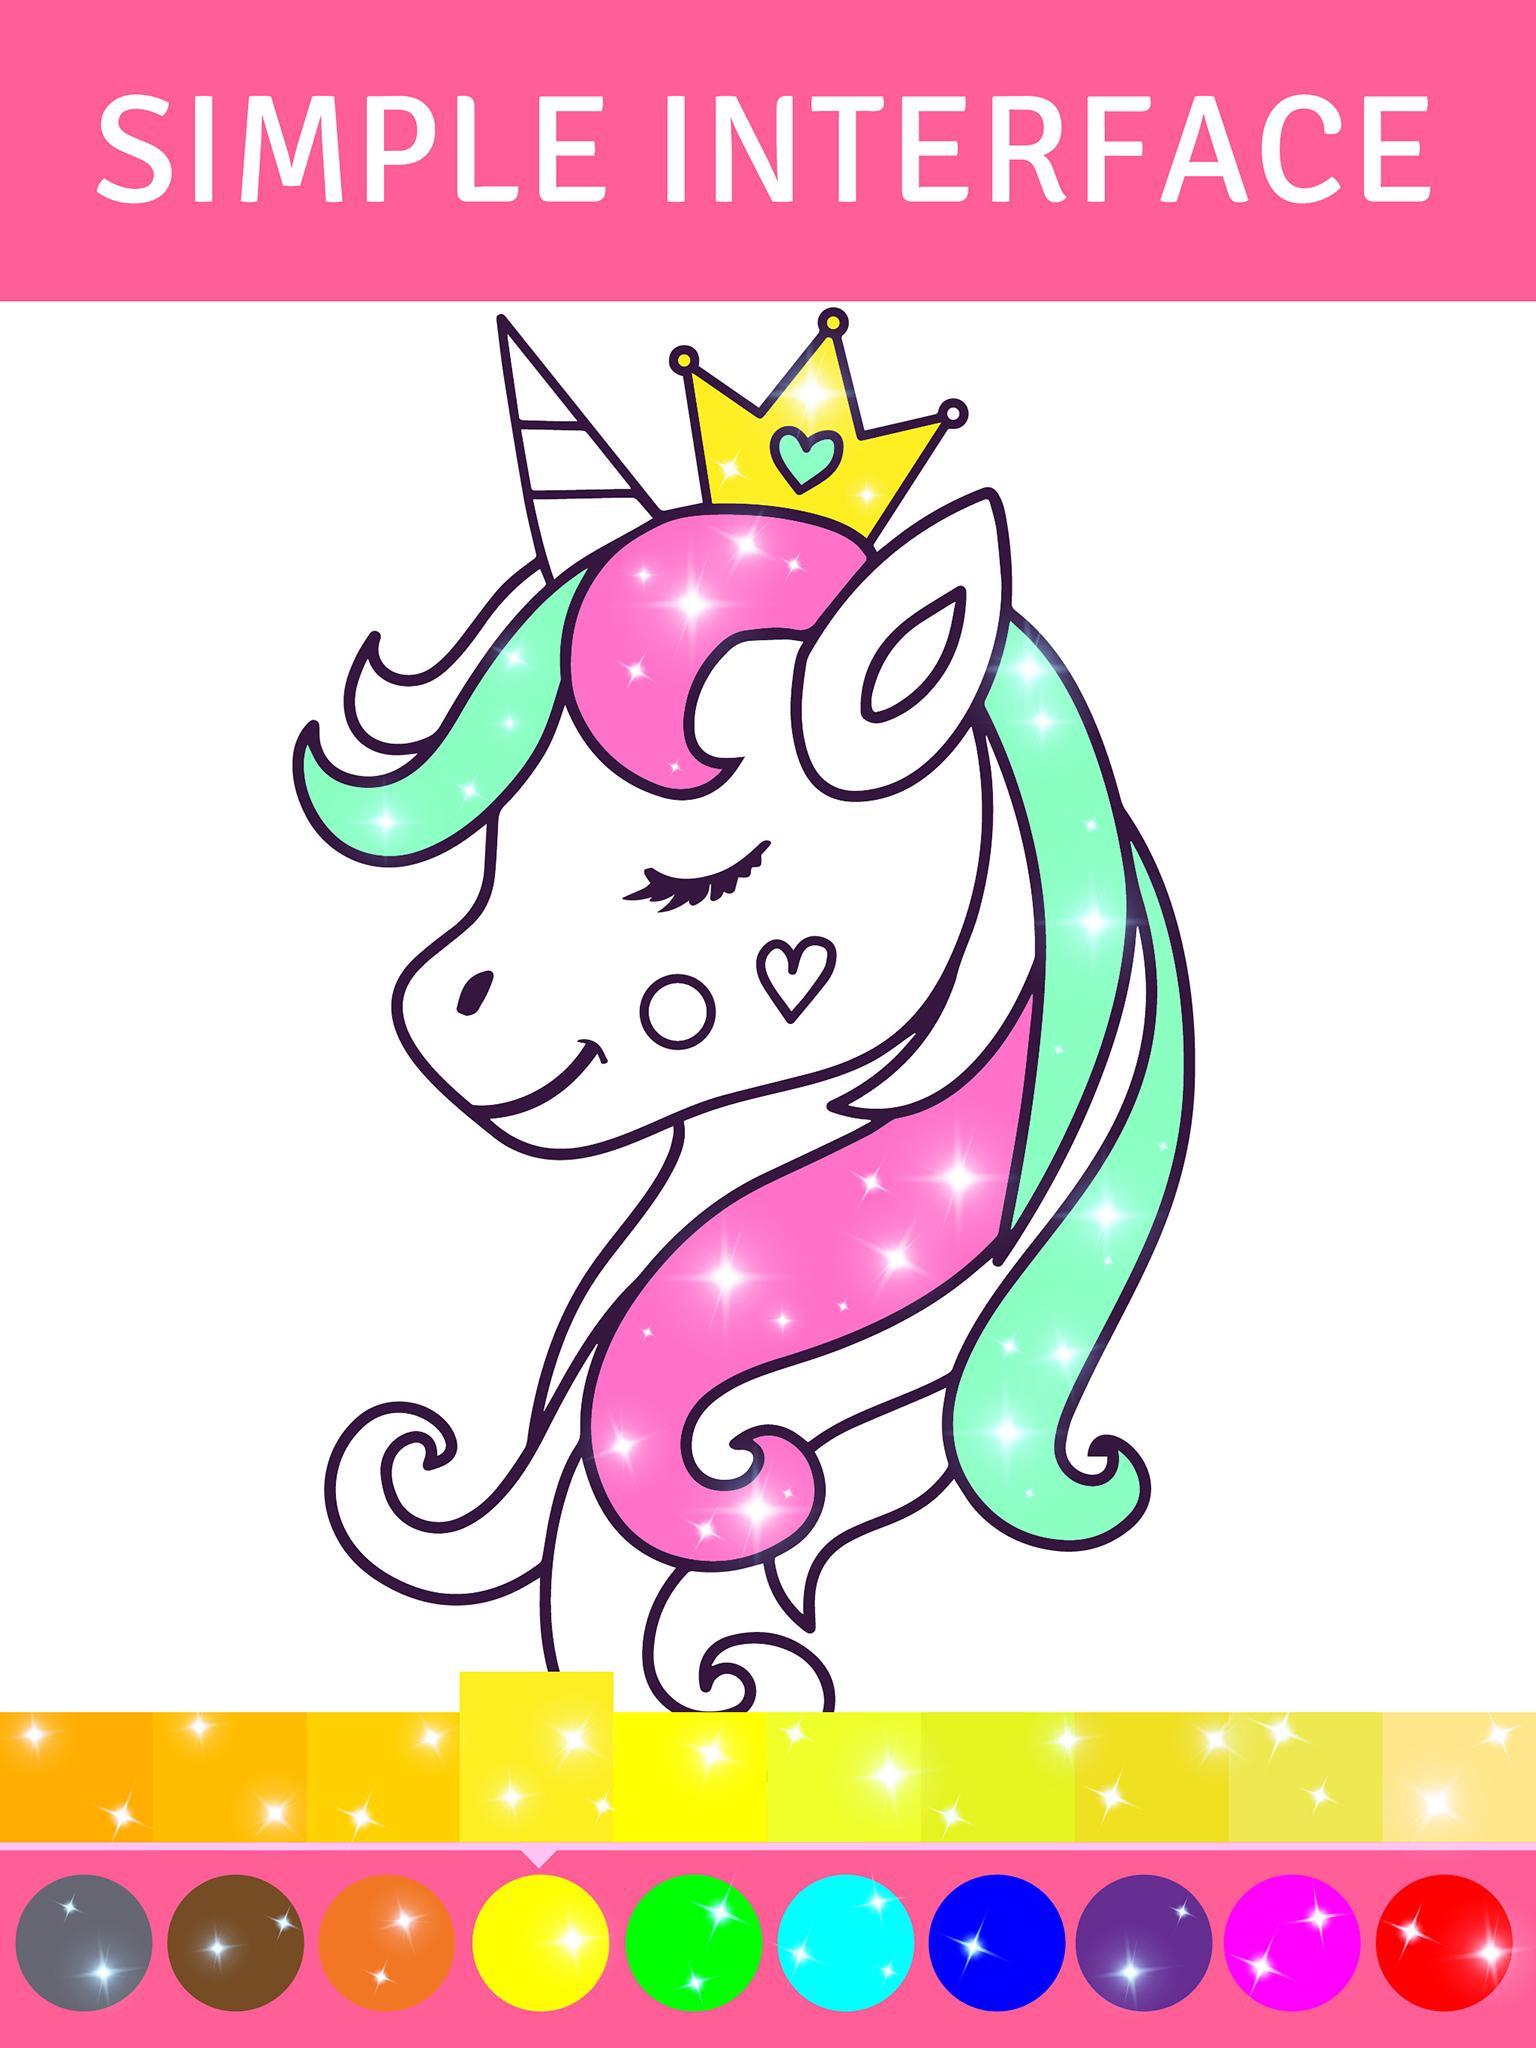 Animated Glitter Coloring Book - My Little Unicorn for Android - APK ...